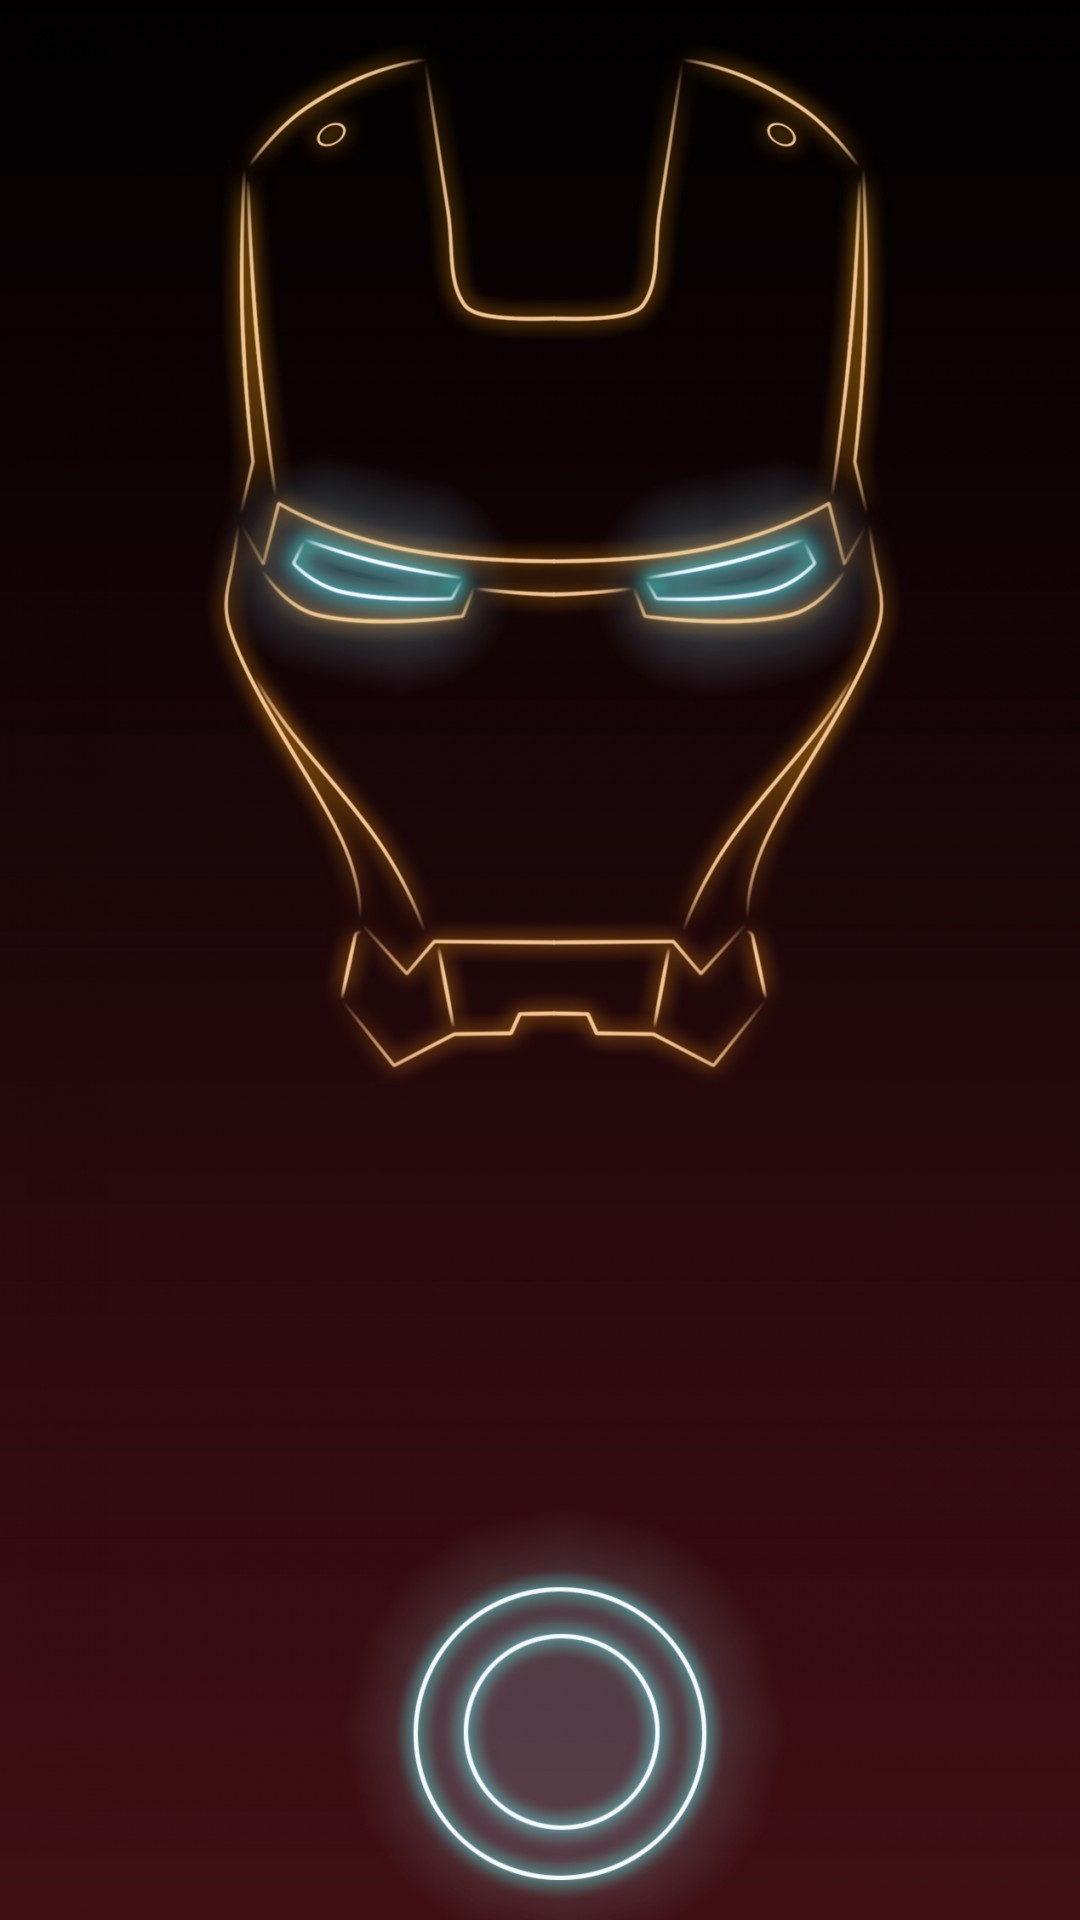 Avengers iPhone Wallpaper (81+ images)